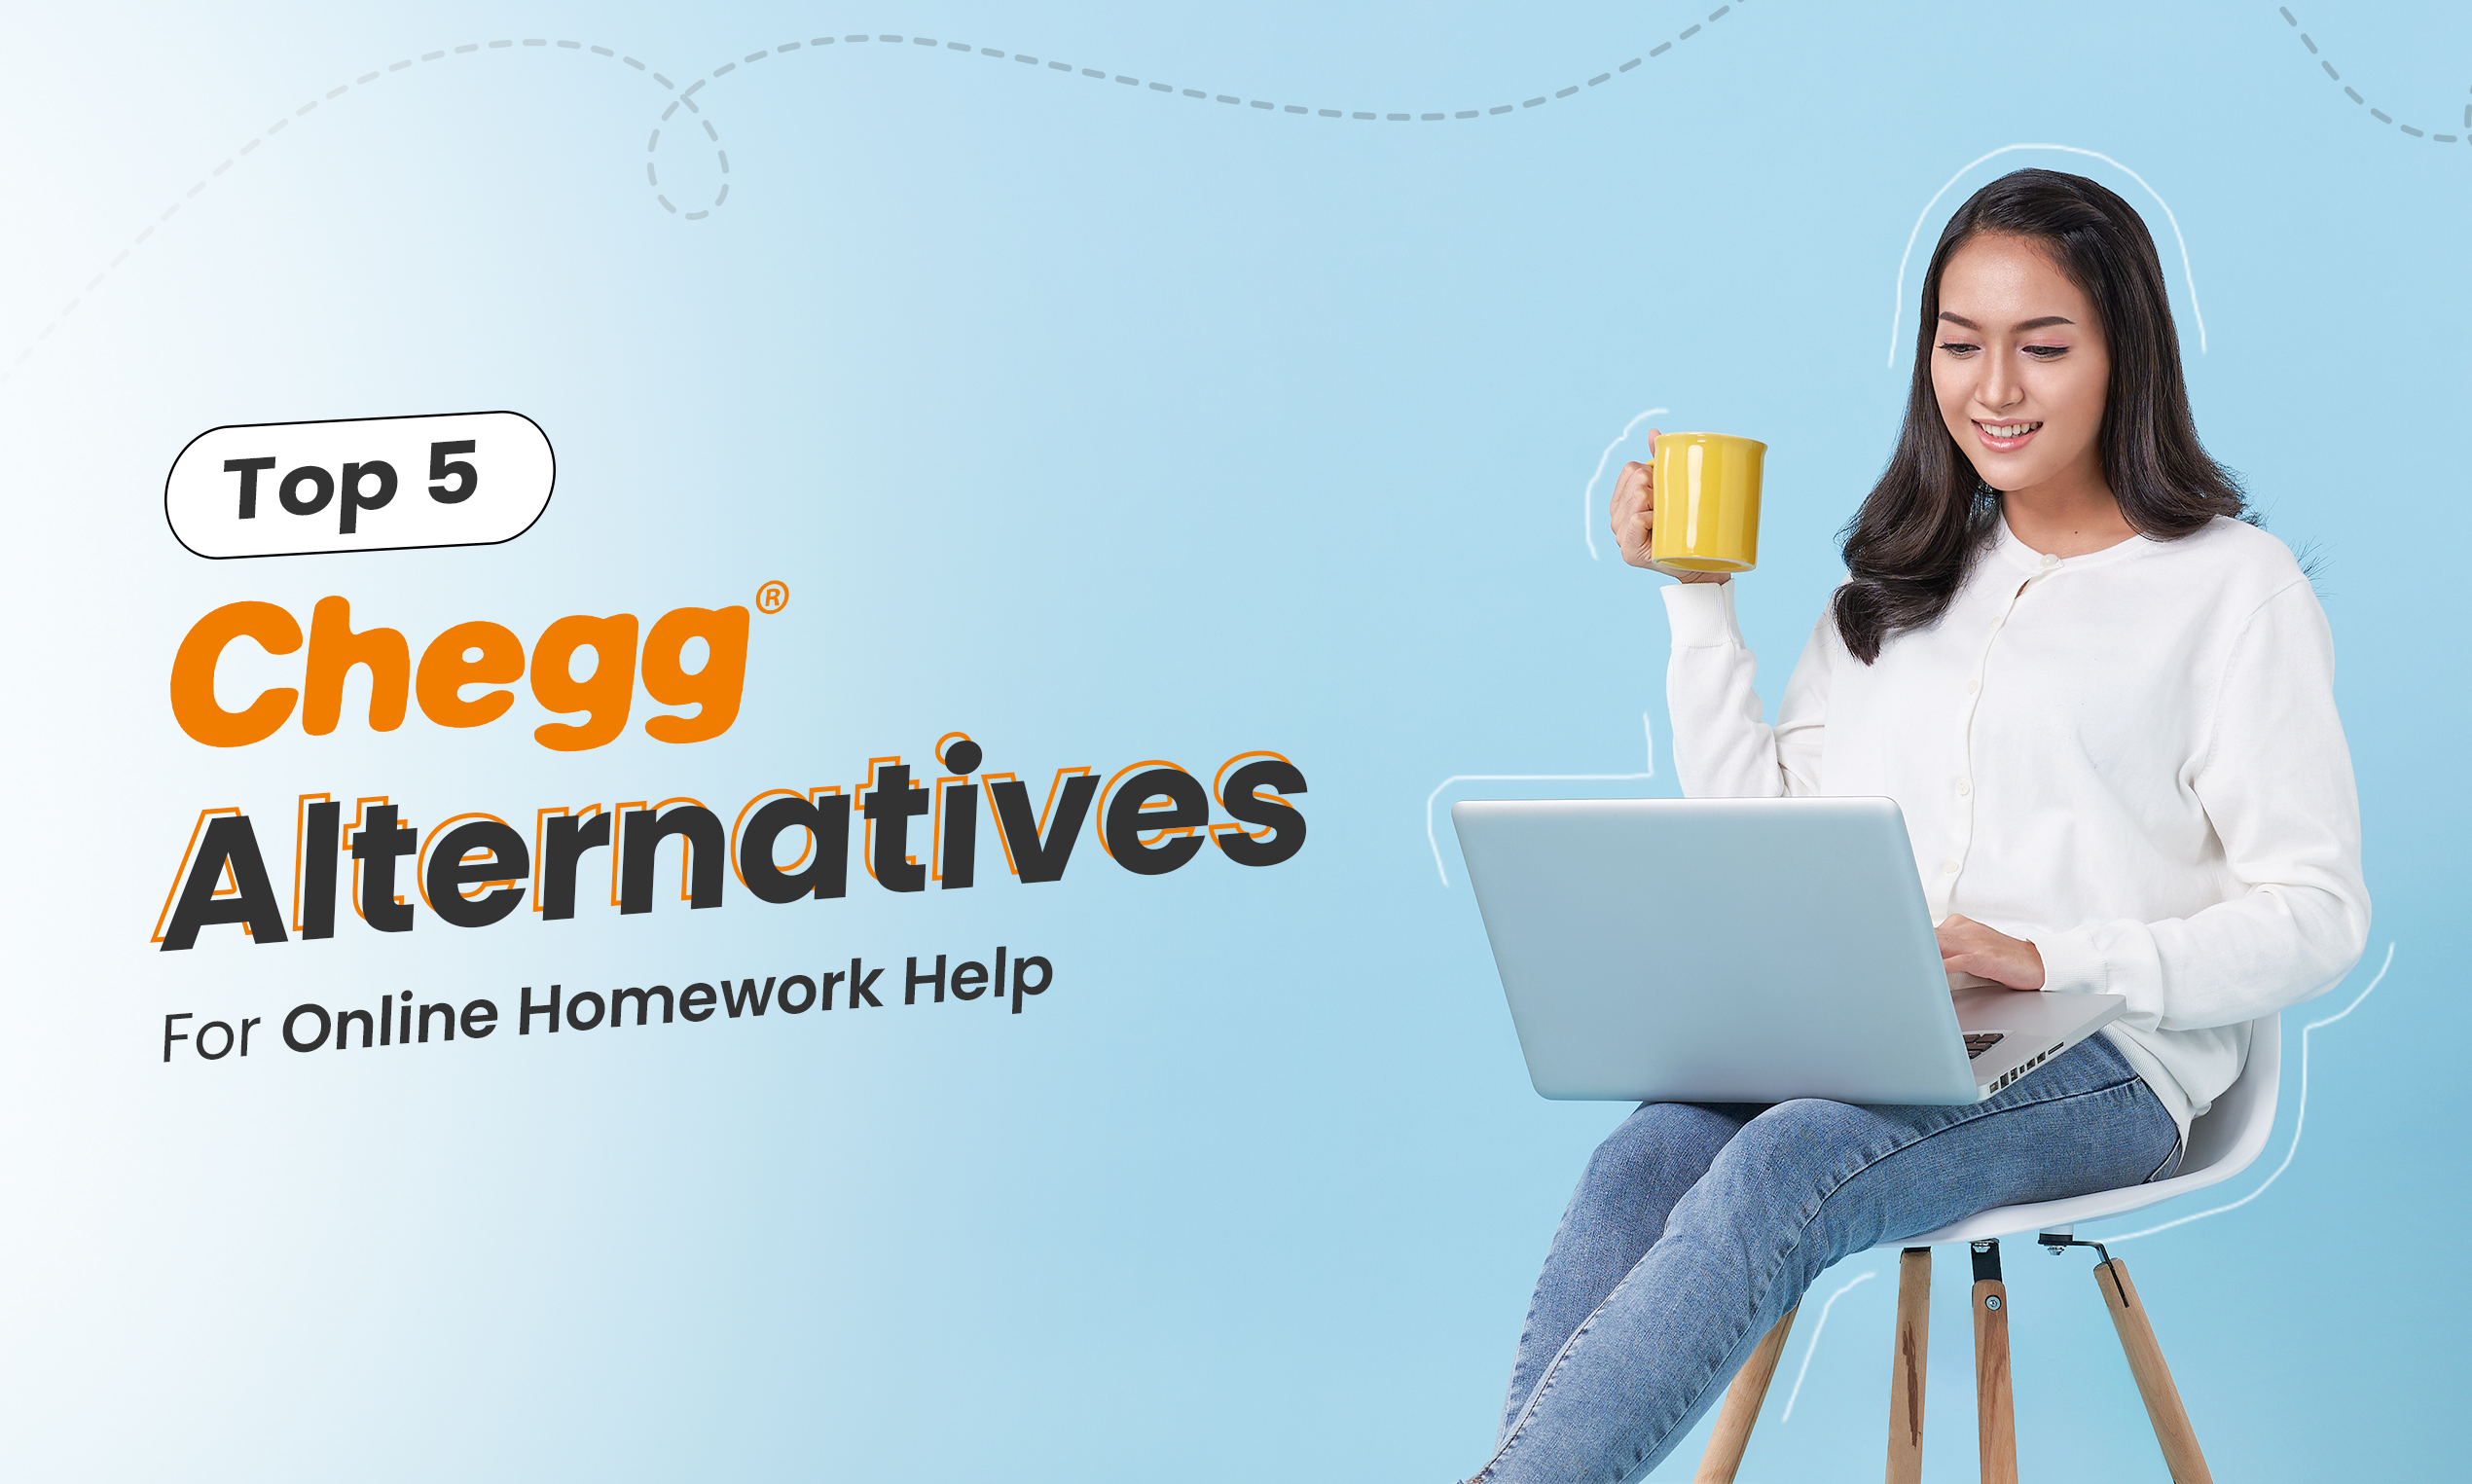 Top 5 Chegg Alternatives You Can Check for Online Homework Help 